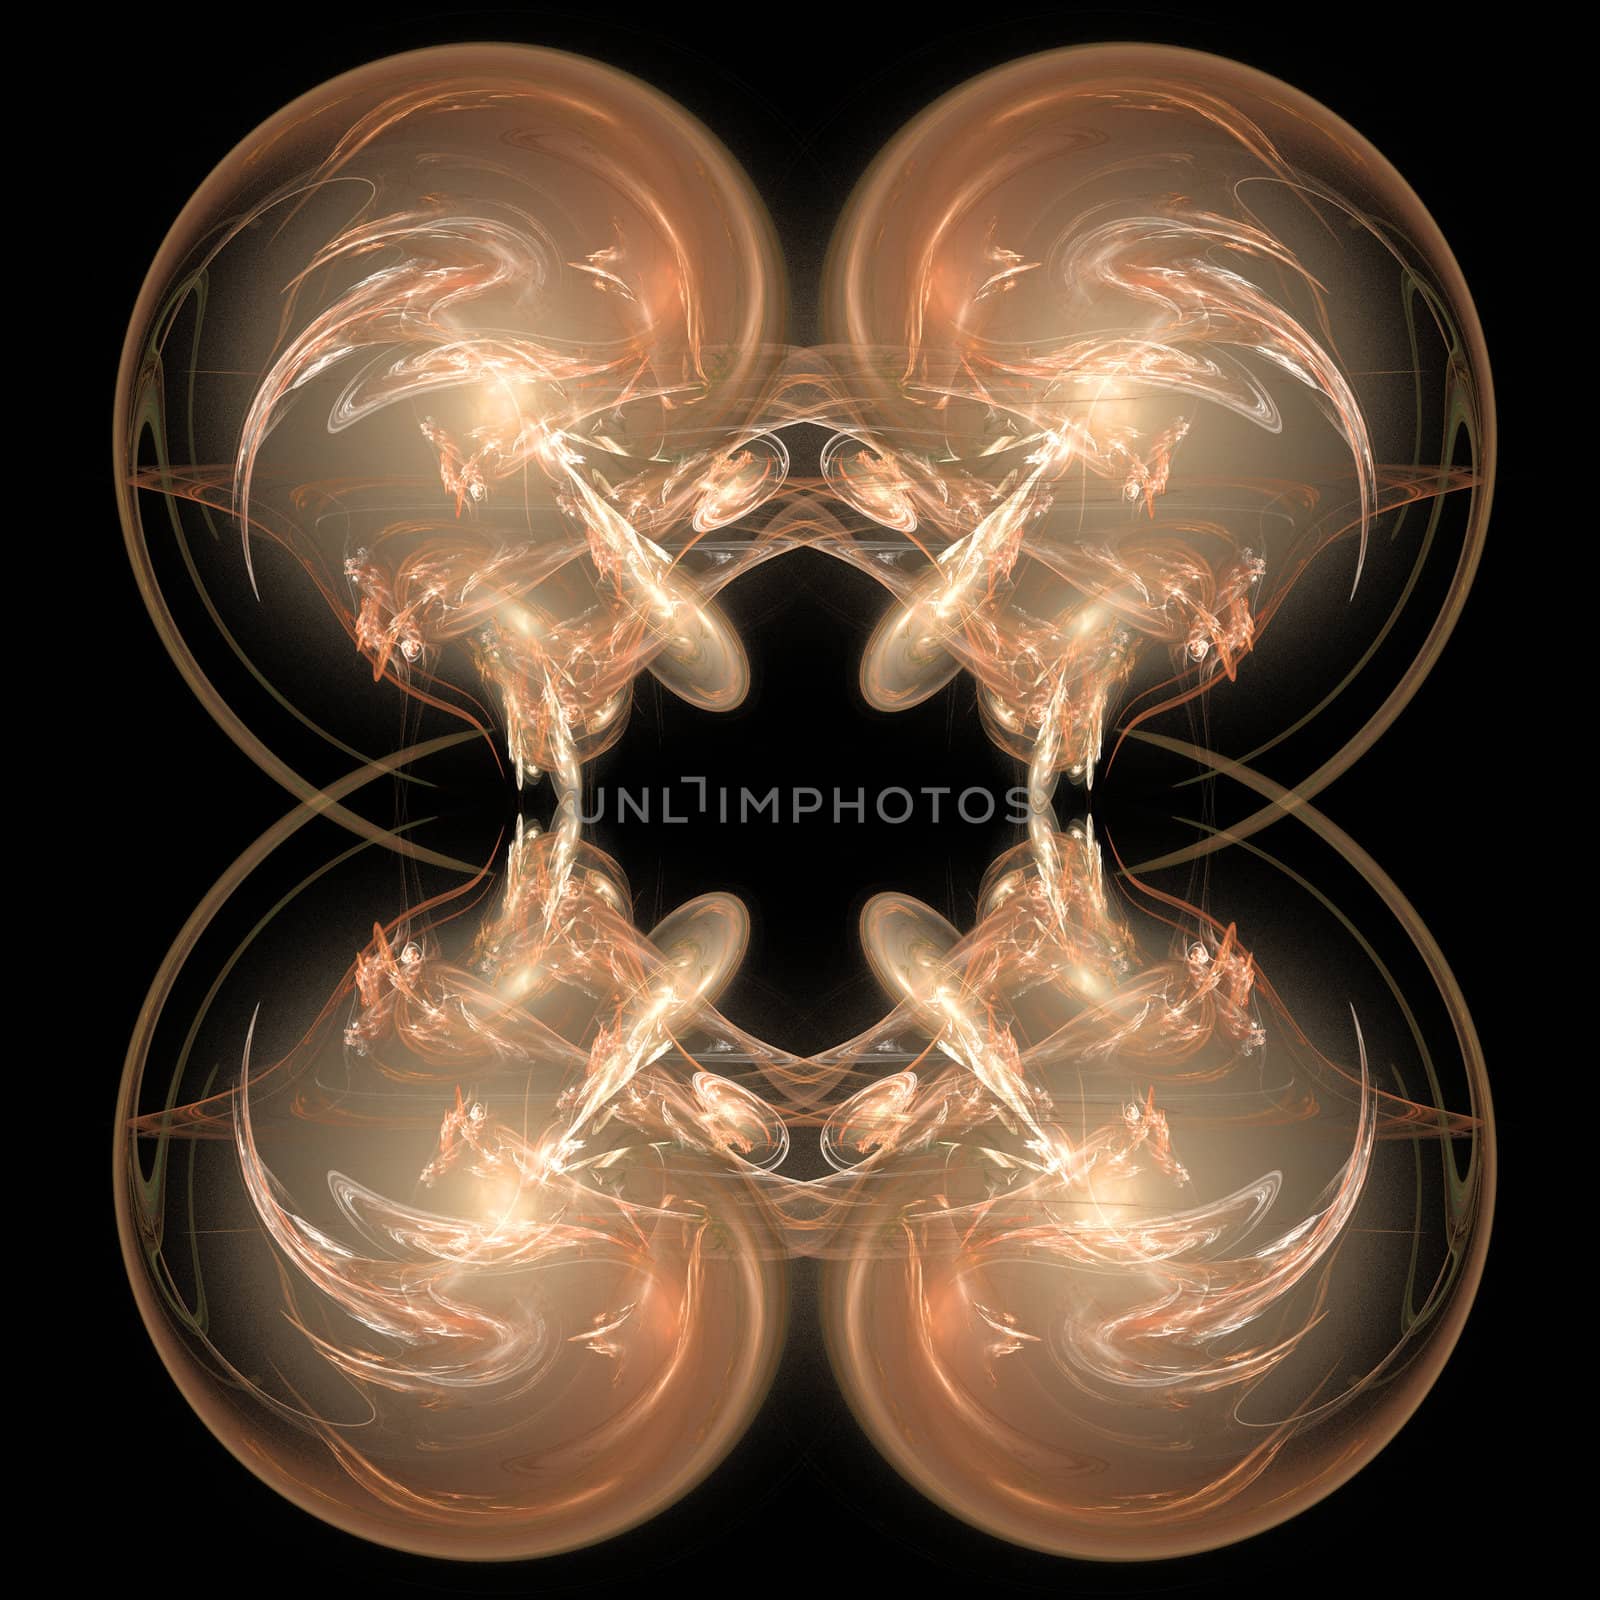 Symmetrical abstract fractal background by mhprice